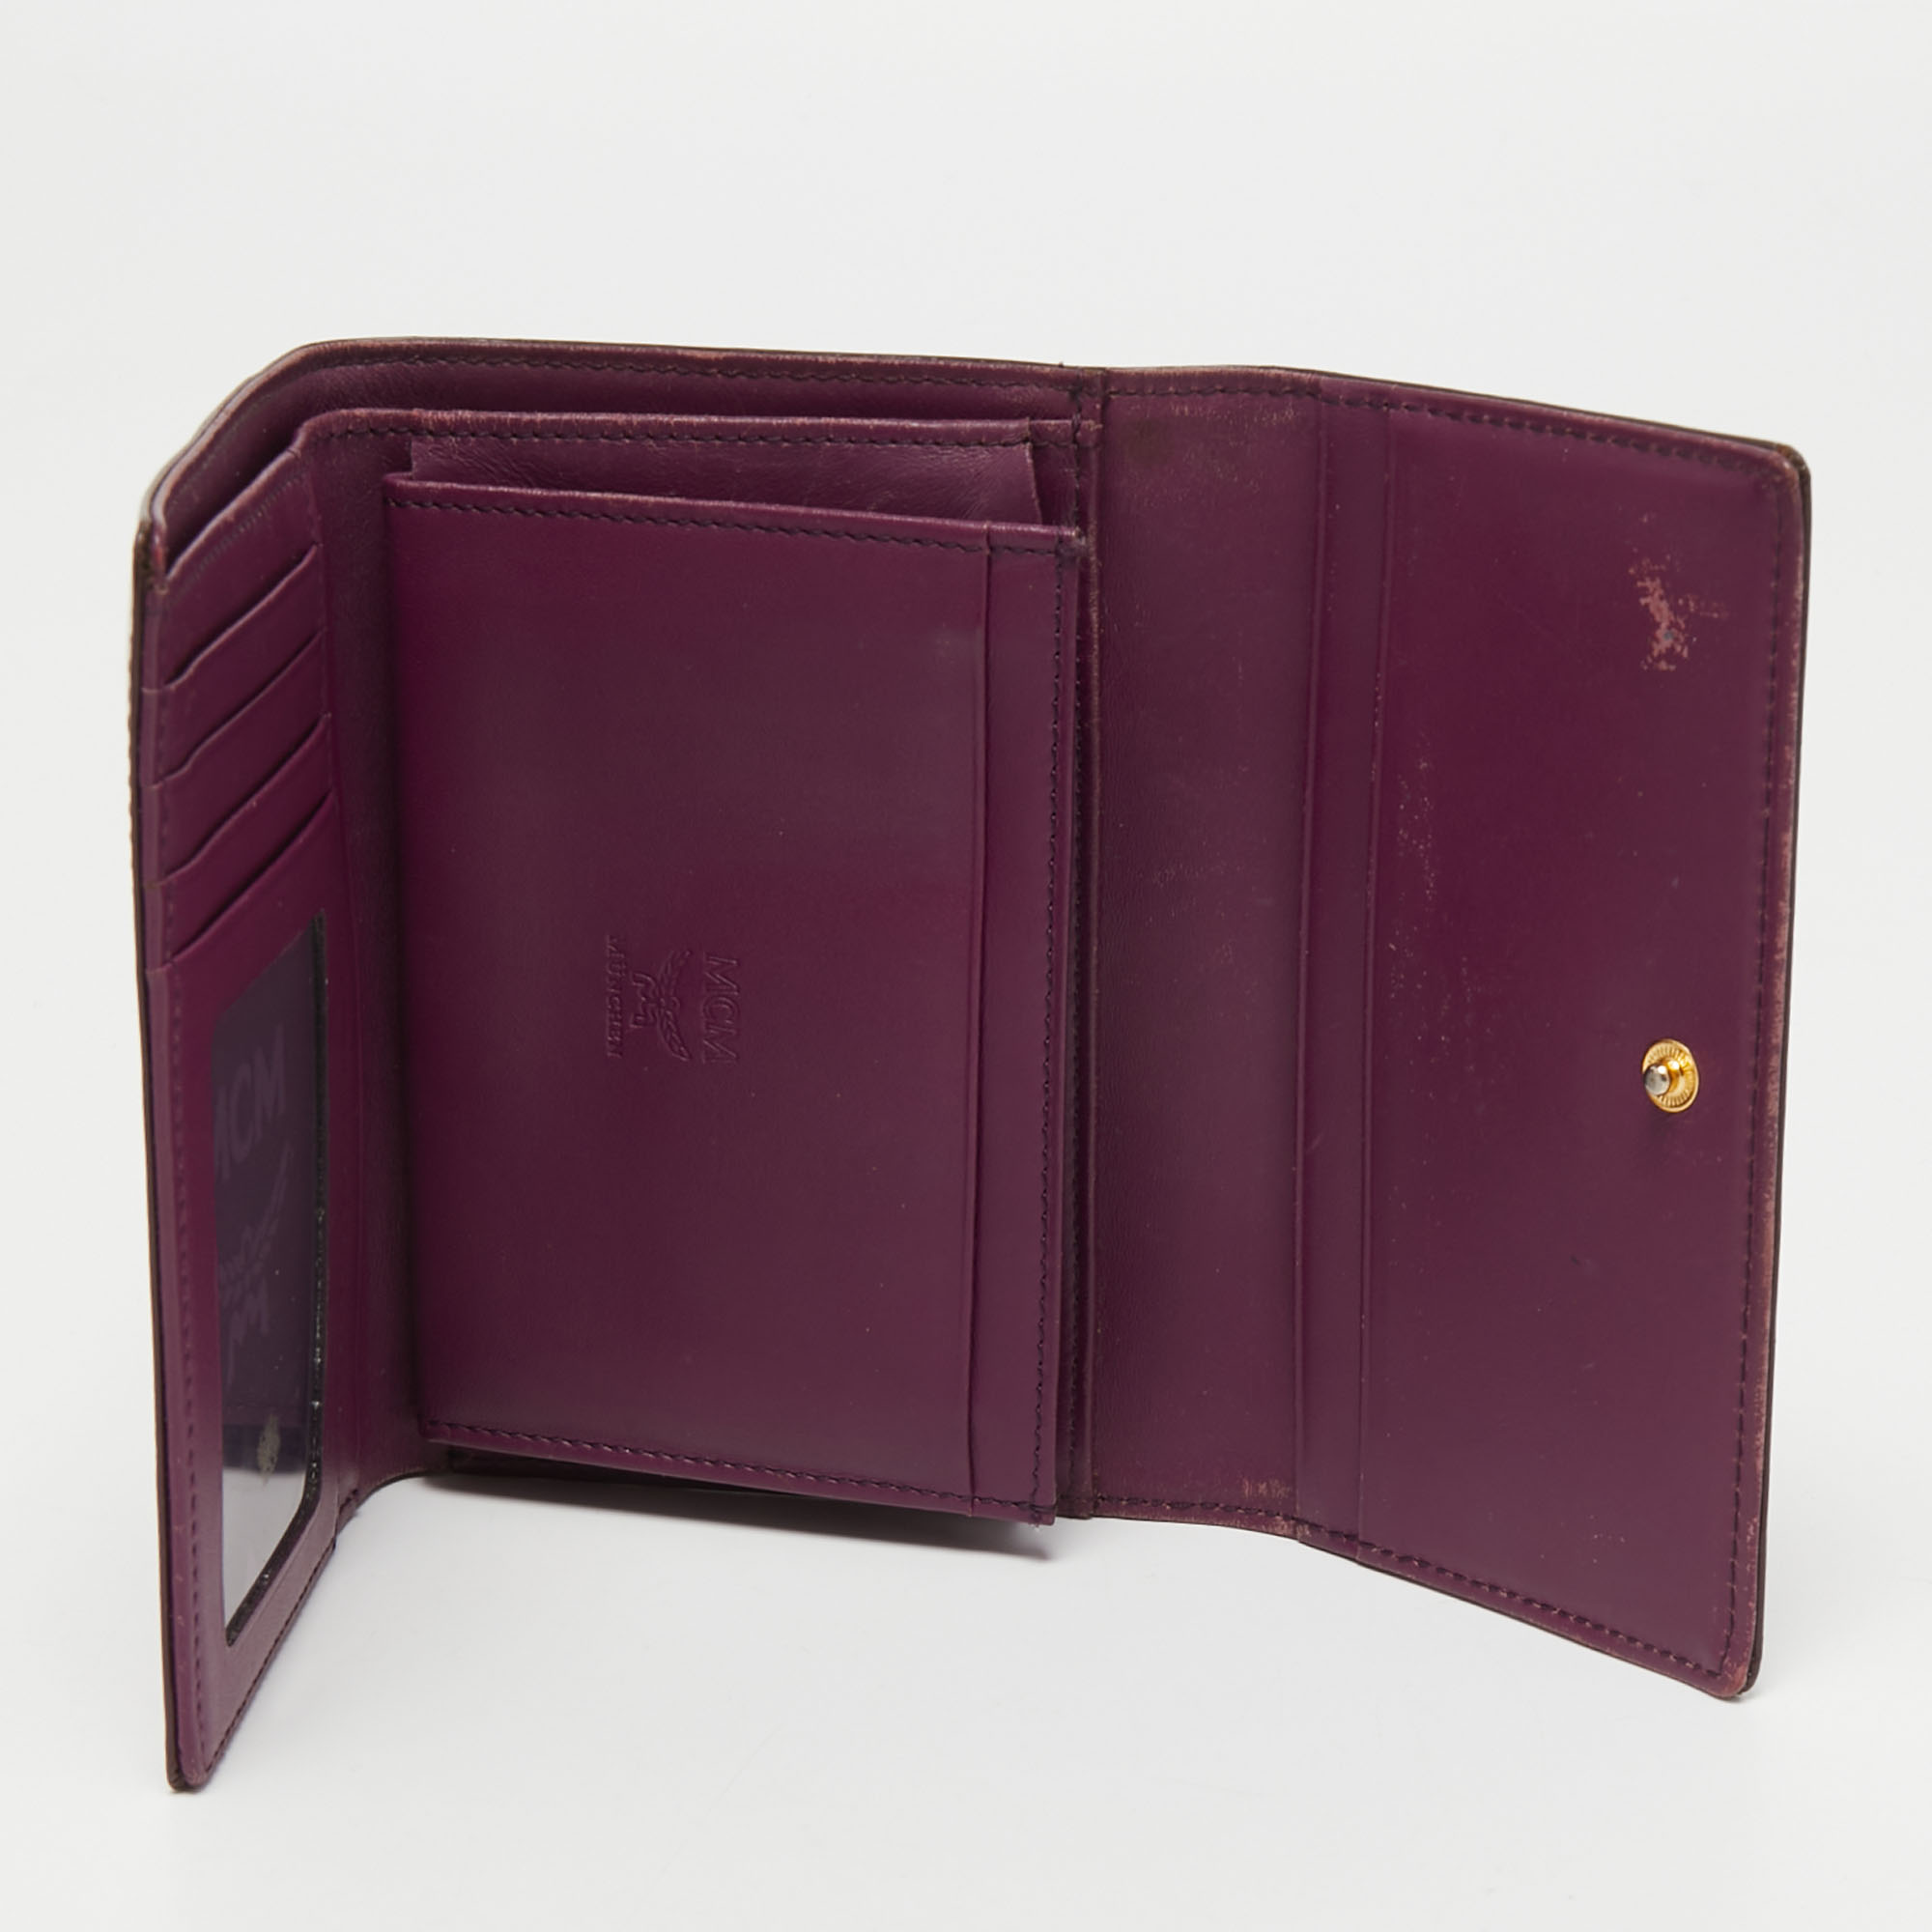 MCM Burgundy Visetos Embossed Patent Leather Tri Fold Compact Wallet